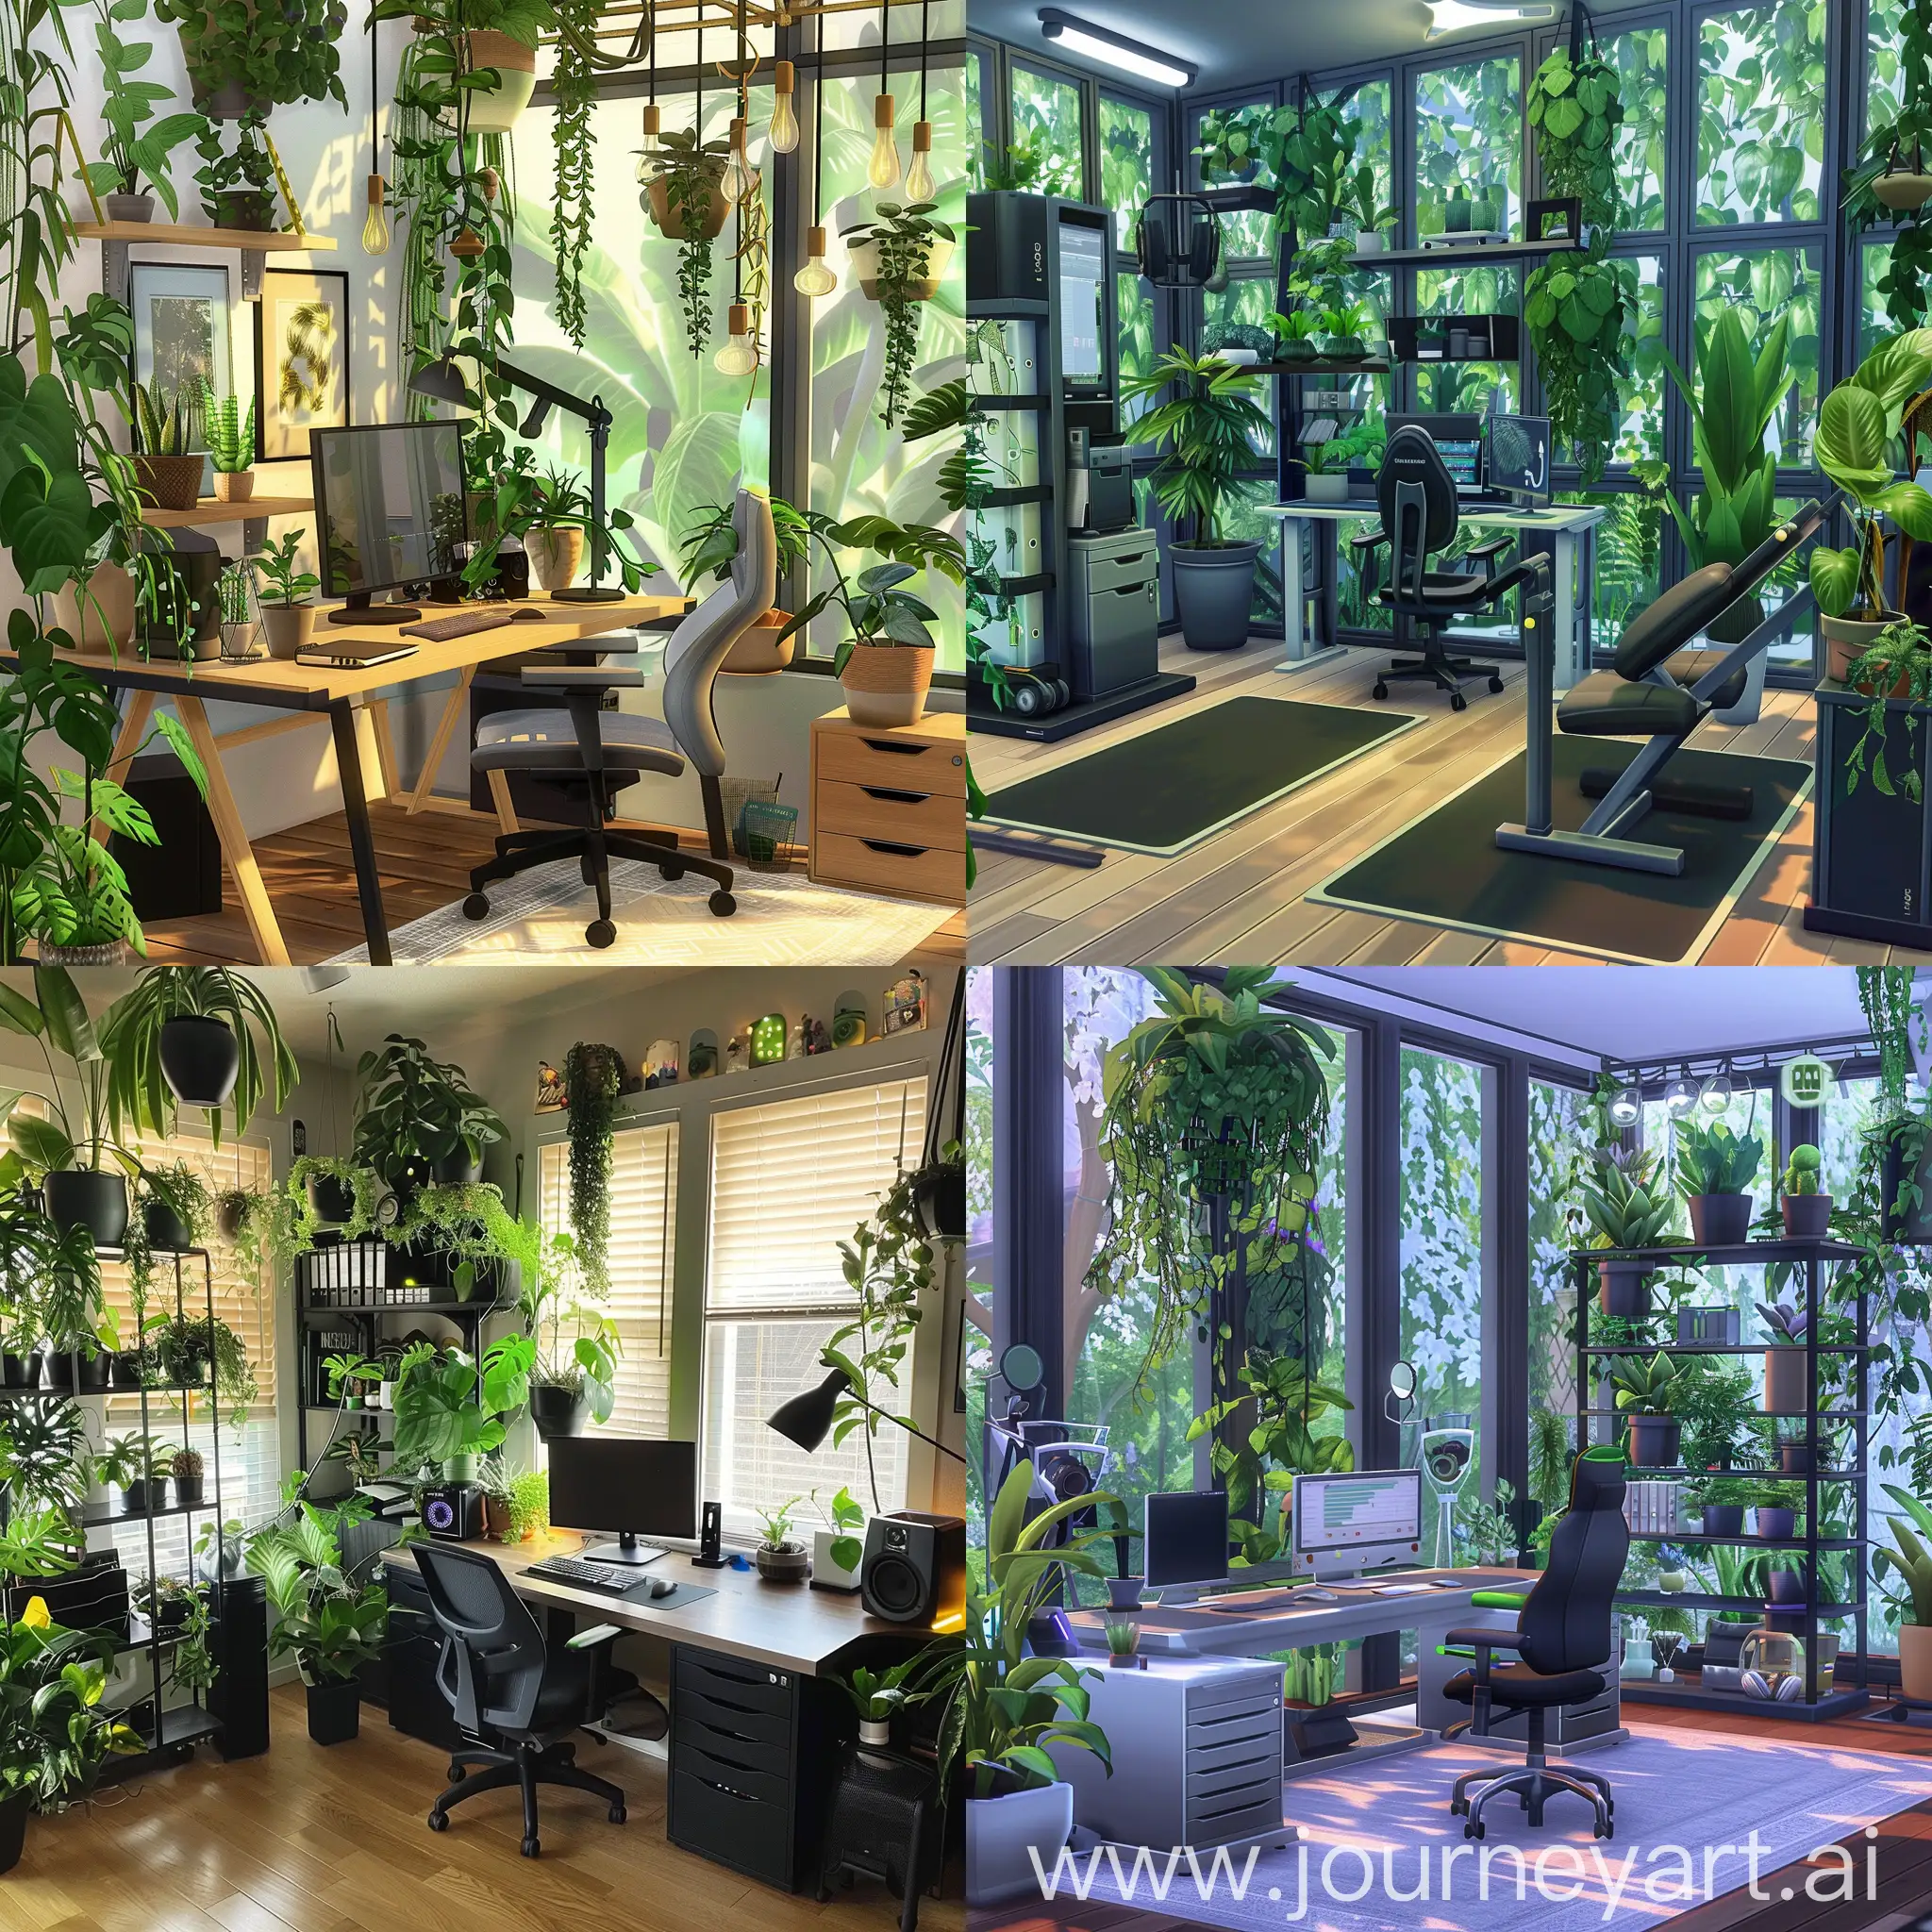 Comfortable-and-Sporty-Office-with-Lush-Greenery-and-Positive-Vibes